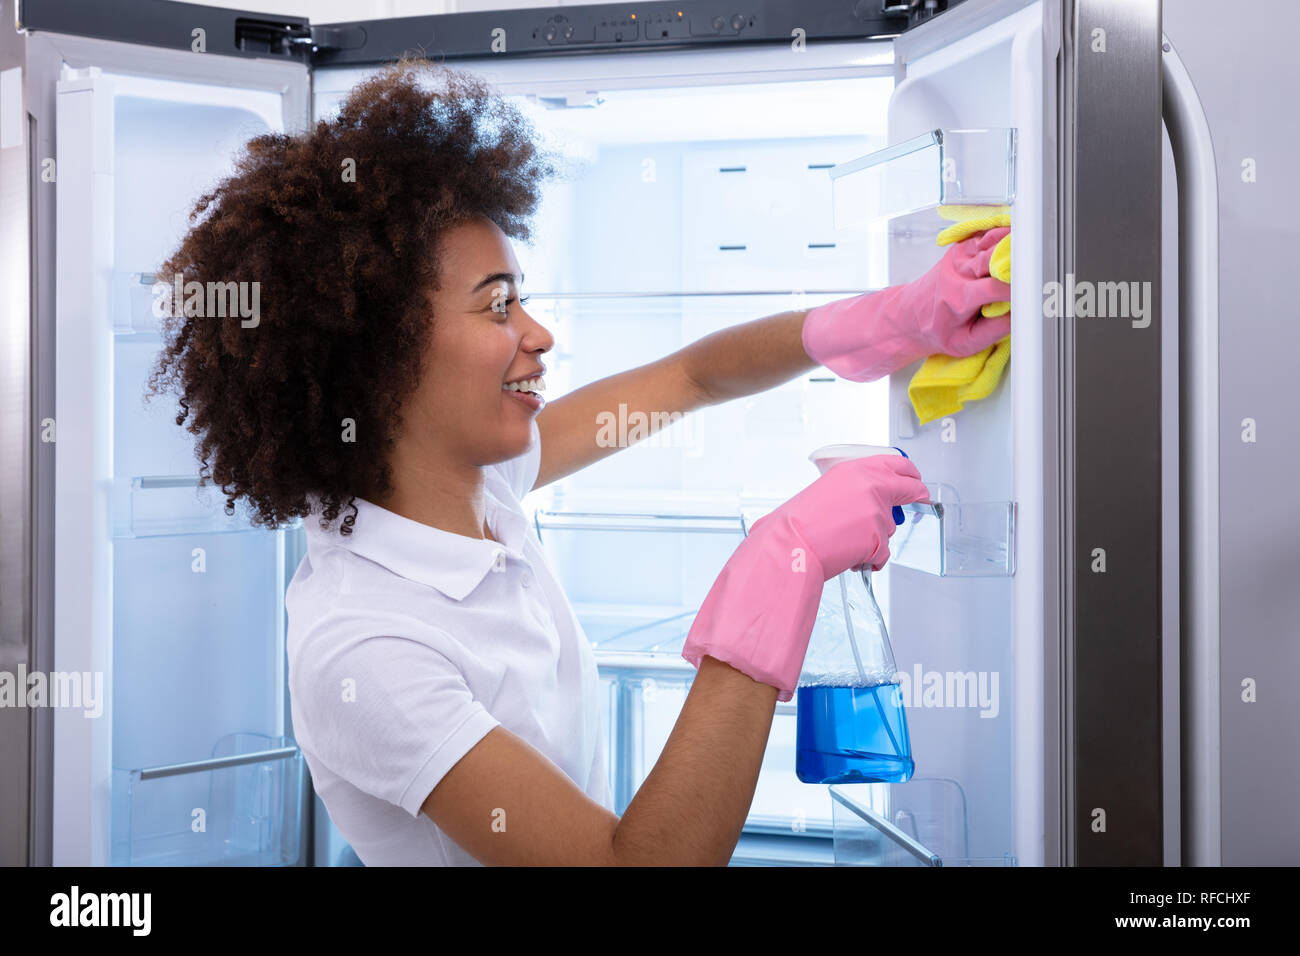 Young Happy Cleaning Lady Cleaning The Empty Refrigerator Door With Spray Bottle And Napkin Stock Photo